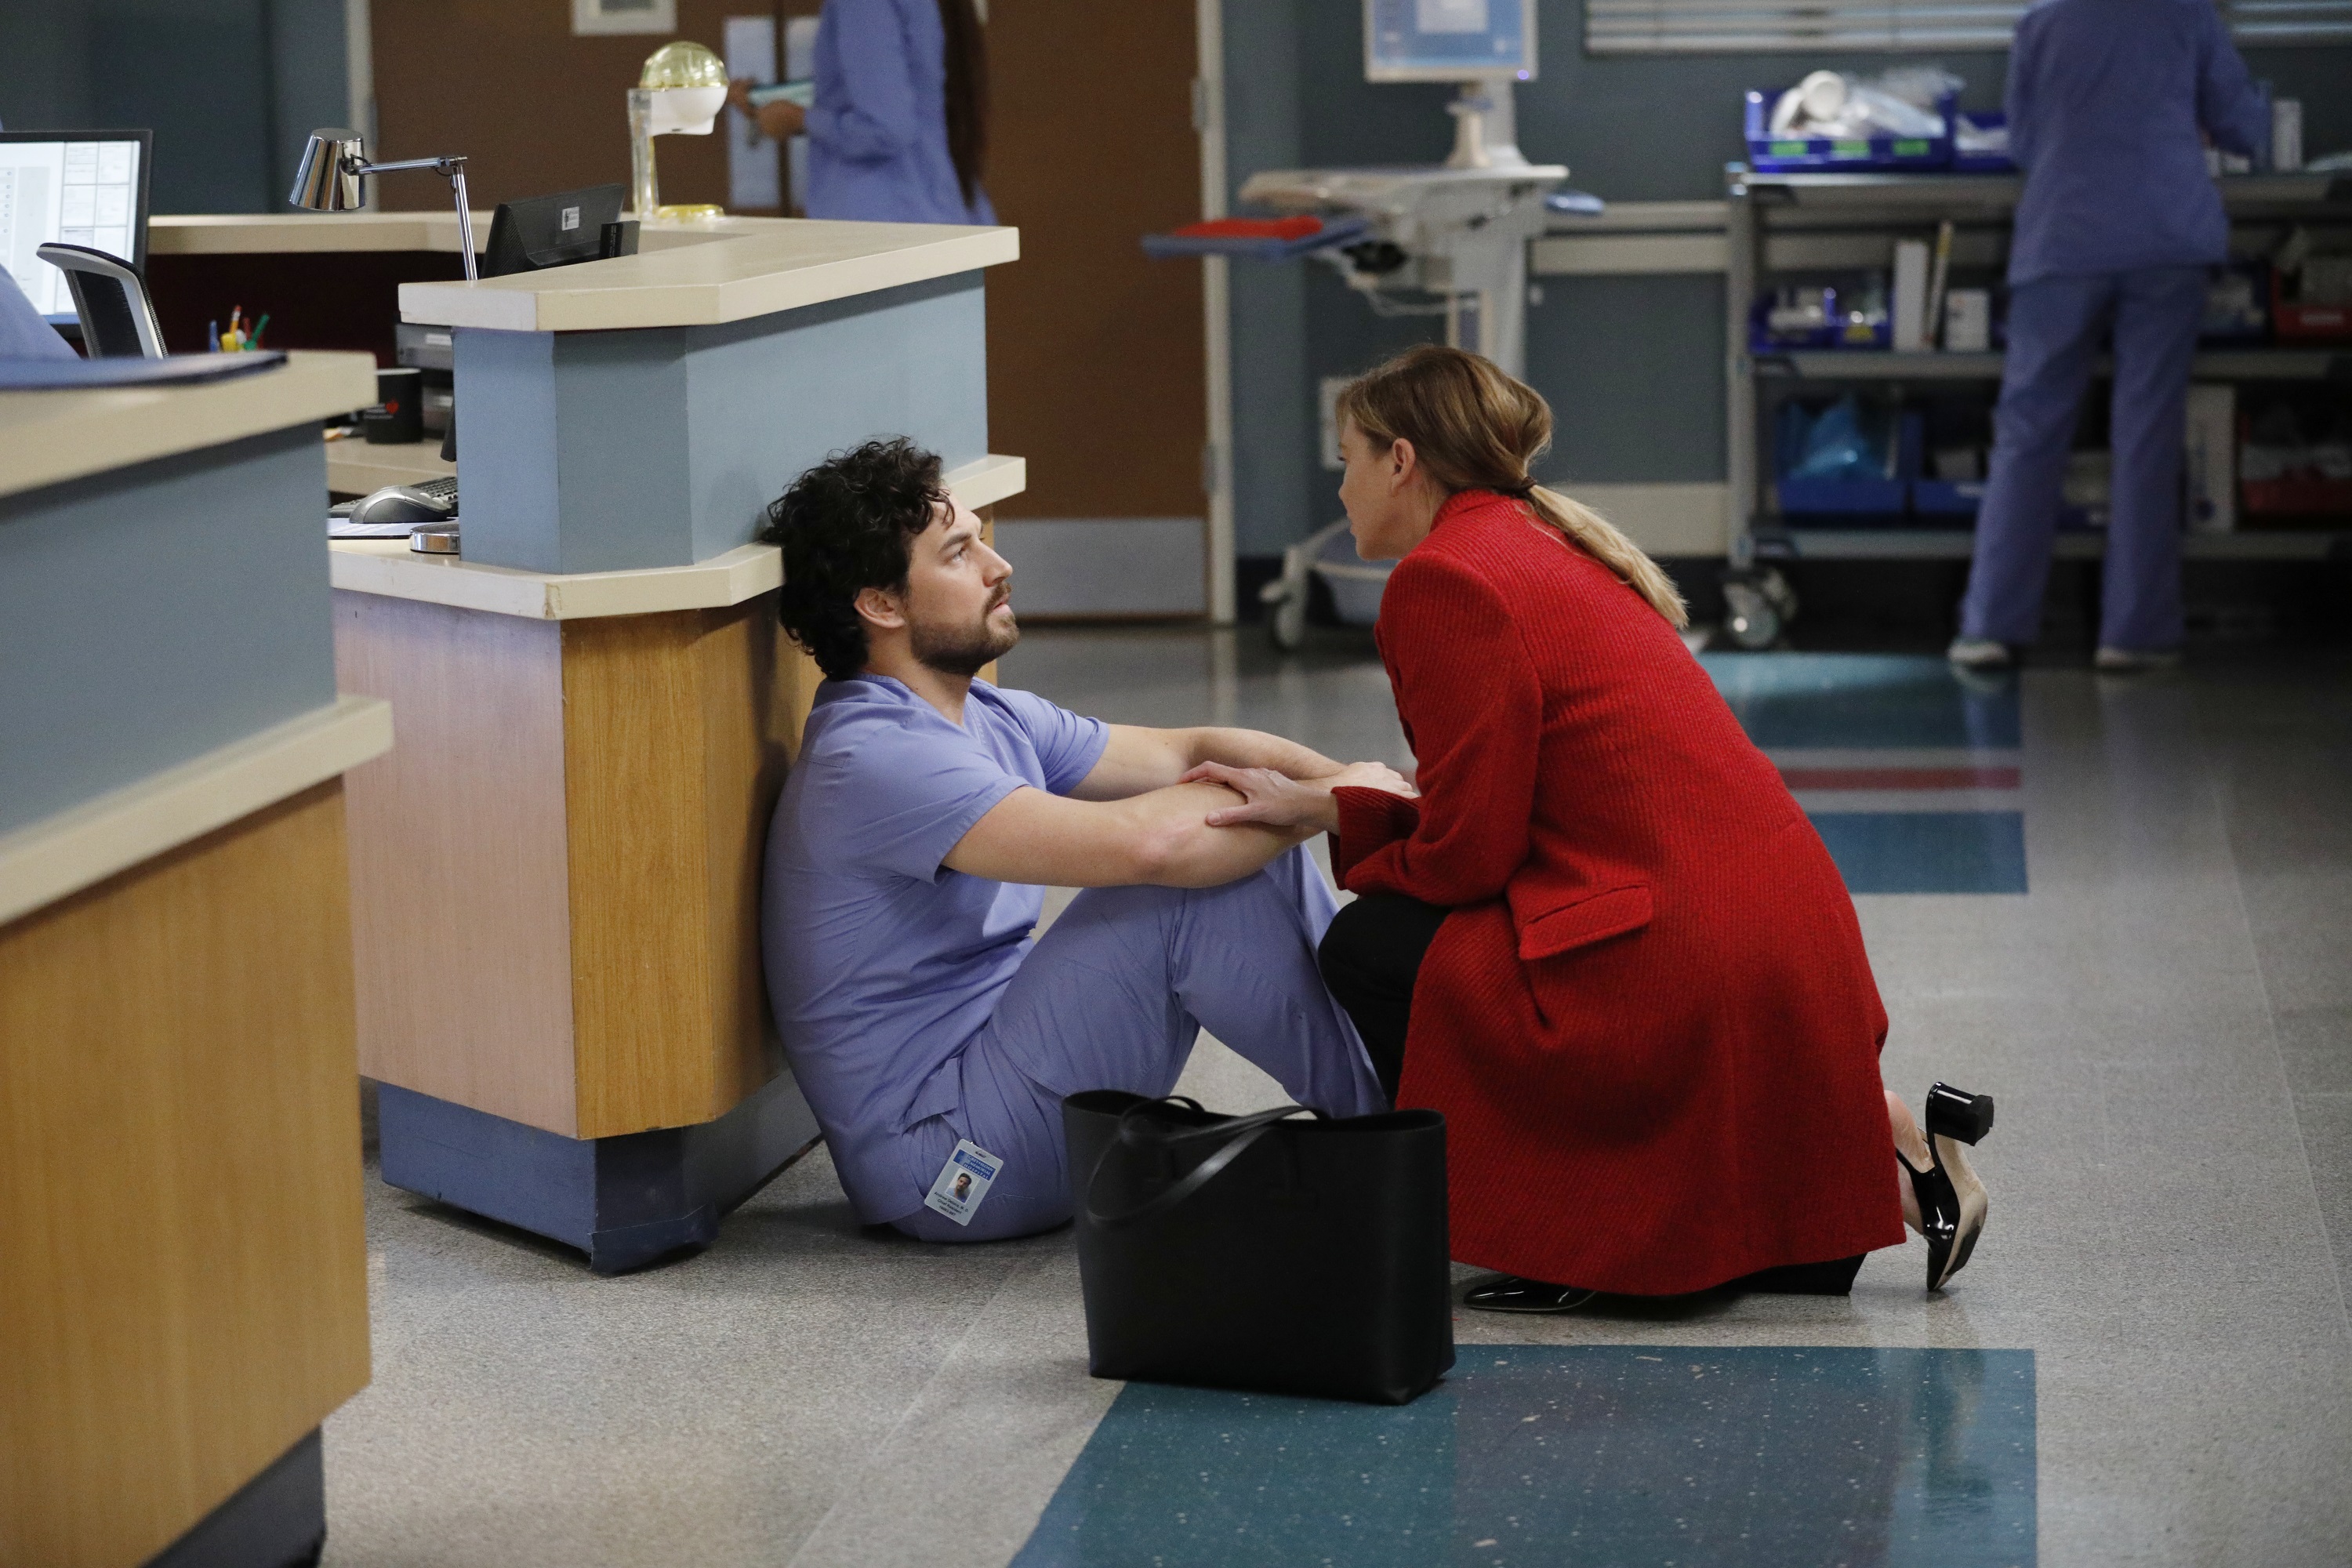 Greys Anatomy Andrew DeLuca and Meredith Grey portrayed by Giacomo Gianniotti and Ellen Pompeo